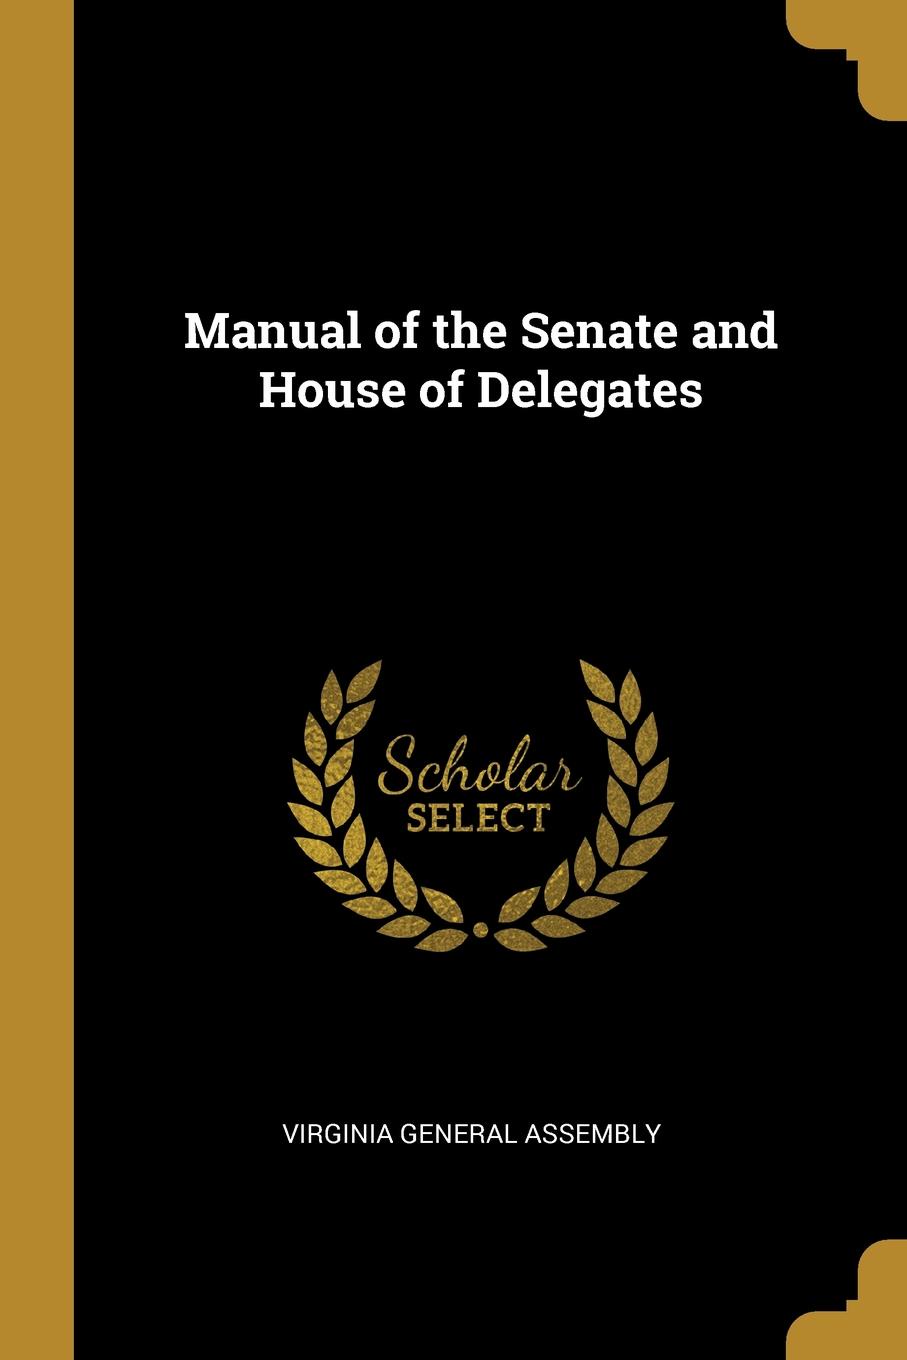 Manual of the Senate and House of Delegates